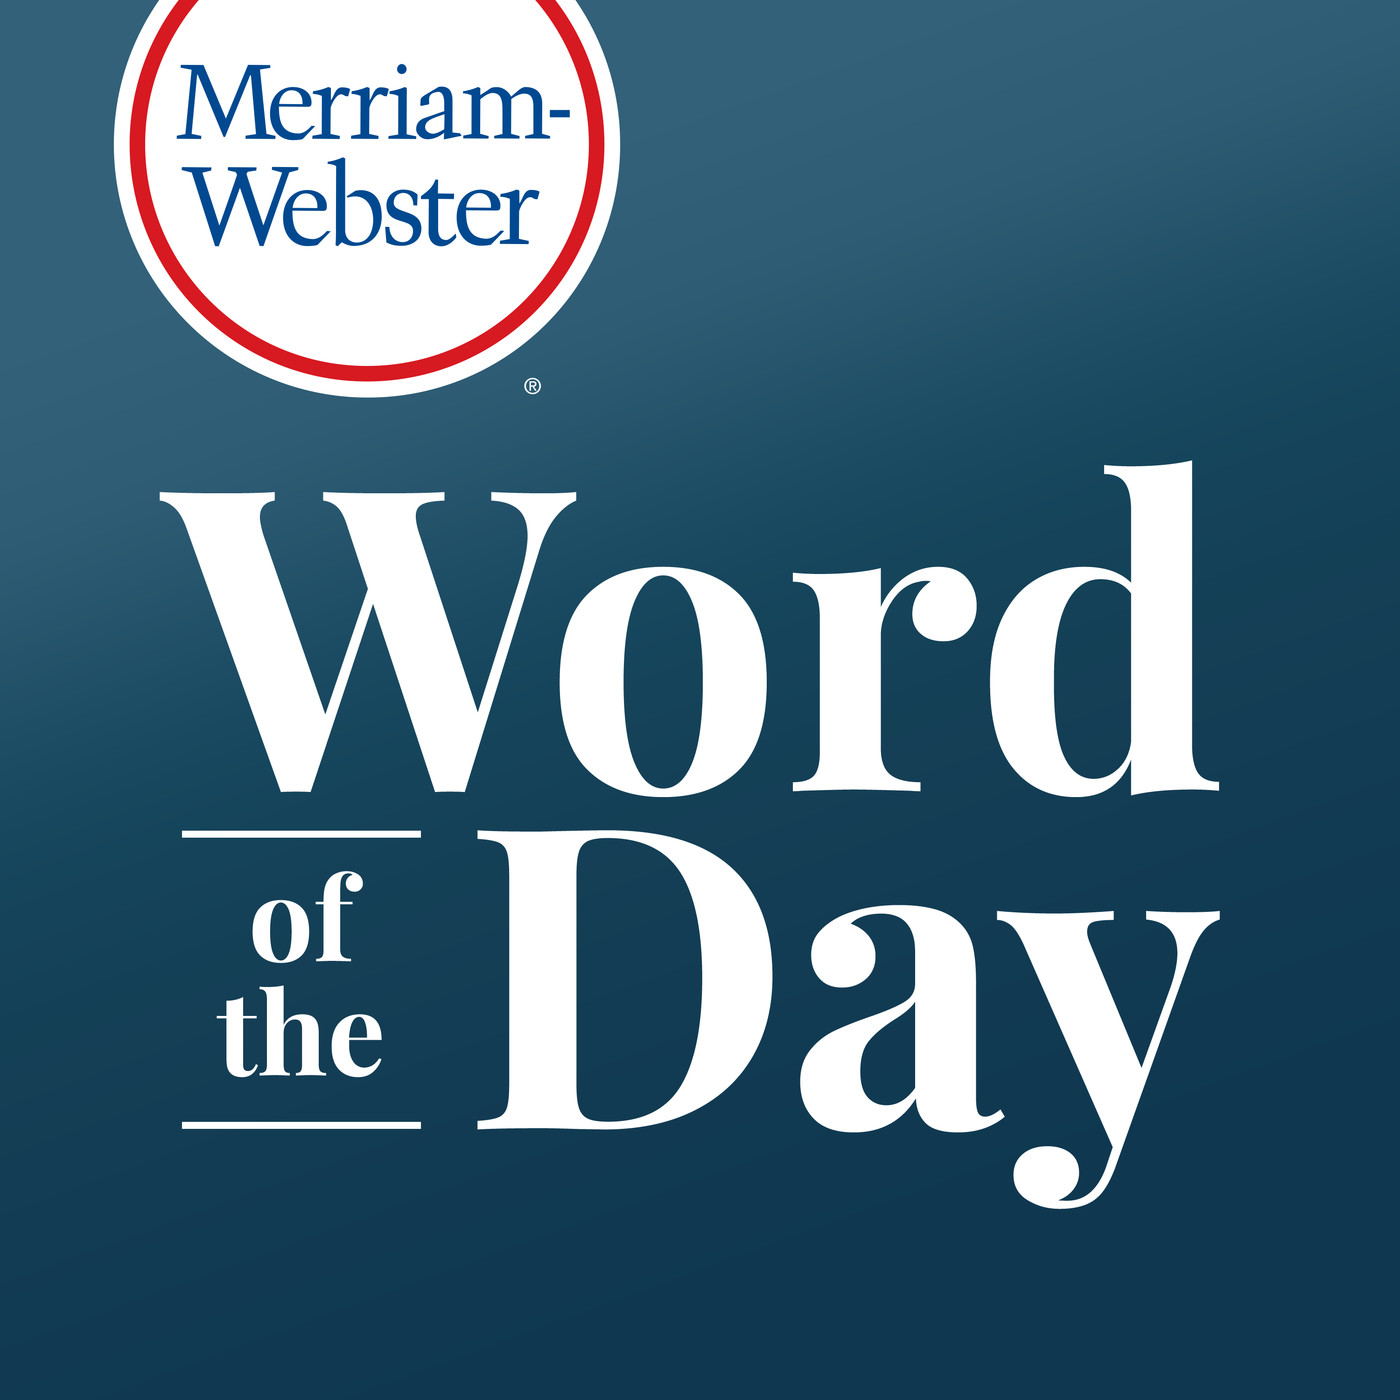 MerriamWebster's Word of the Day